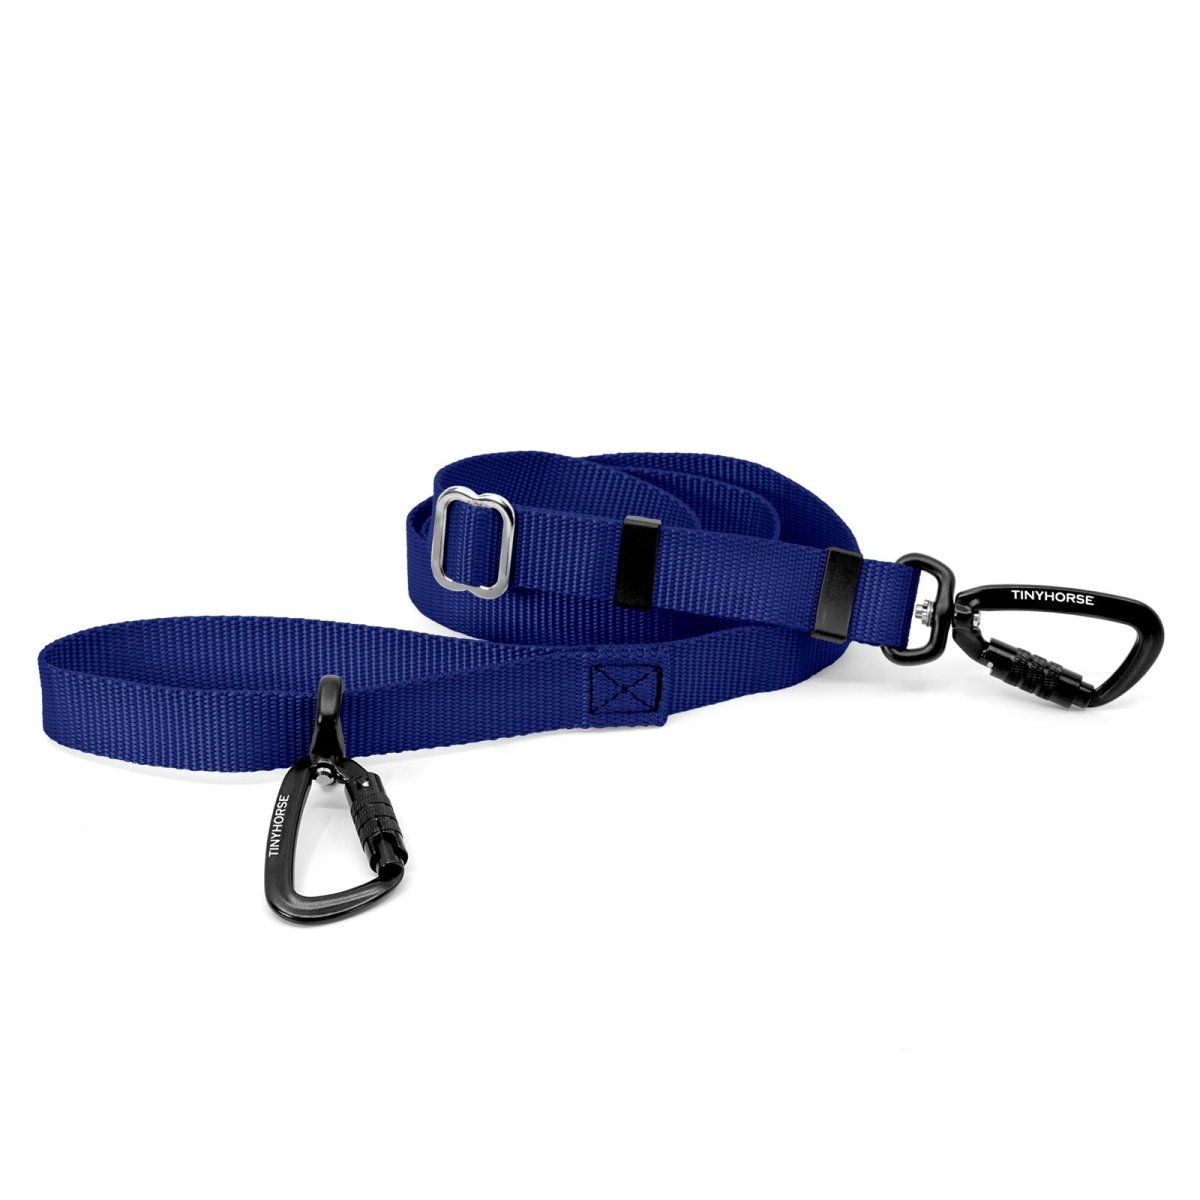 A royal blue-coloured Lead-All Lite Extra with an adjustable nylon webbing leash and 2 auto-locking carabiners